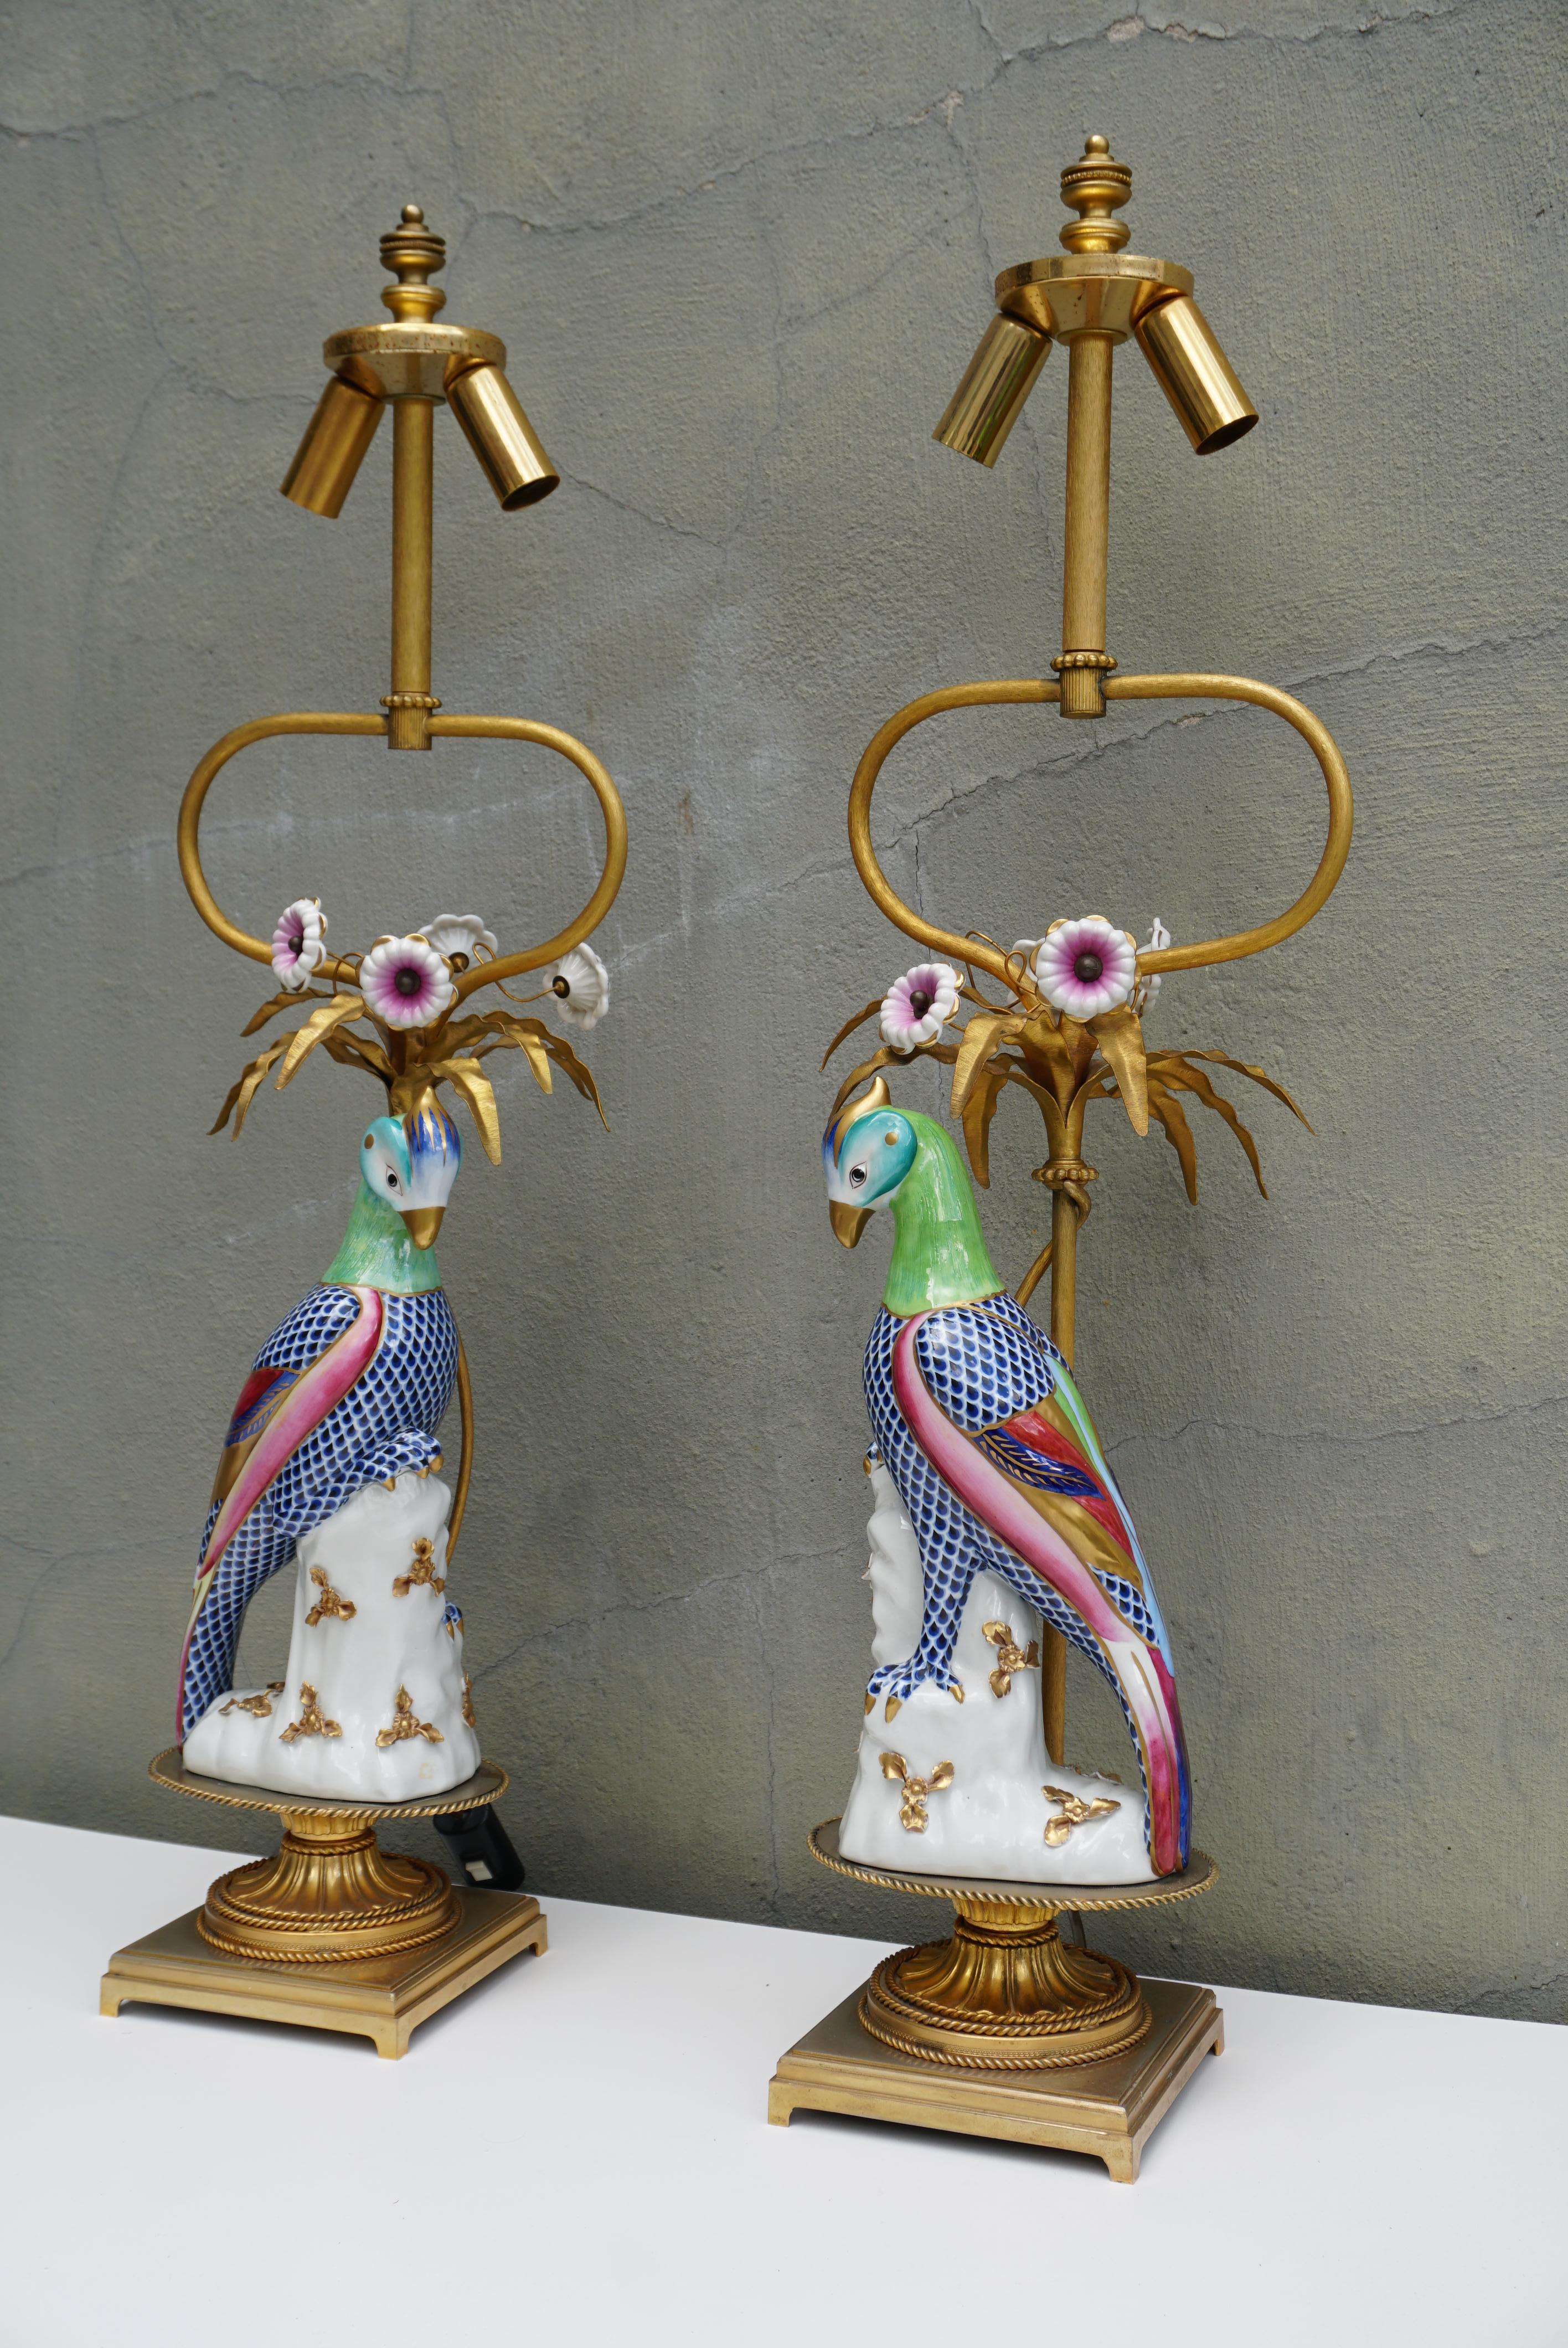 Pair of Mid-century Italian Mangani signed porcelain faience parrot bird and flower table lamps.

Stunning Giulia Mangani - Italian Tole lamp with exotic Bird - Sèvres style porcelain - With flowers. 
1970s 

Height 31.8